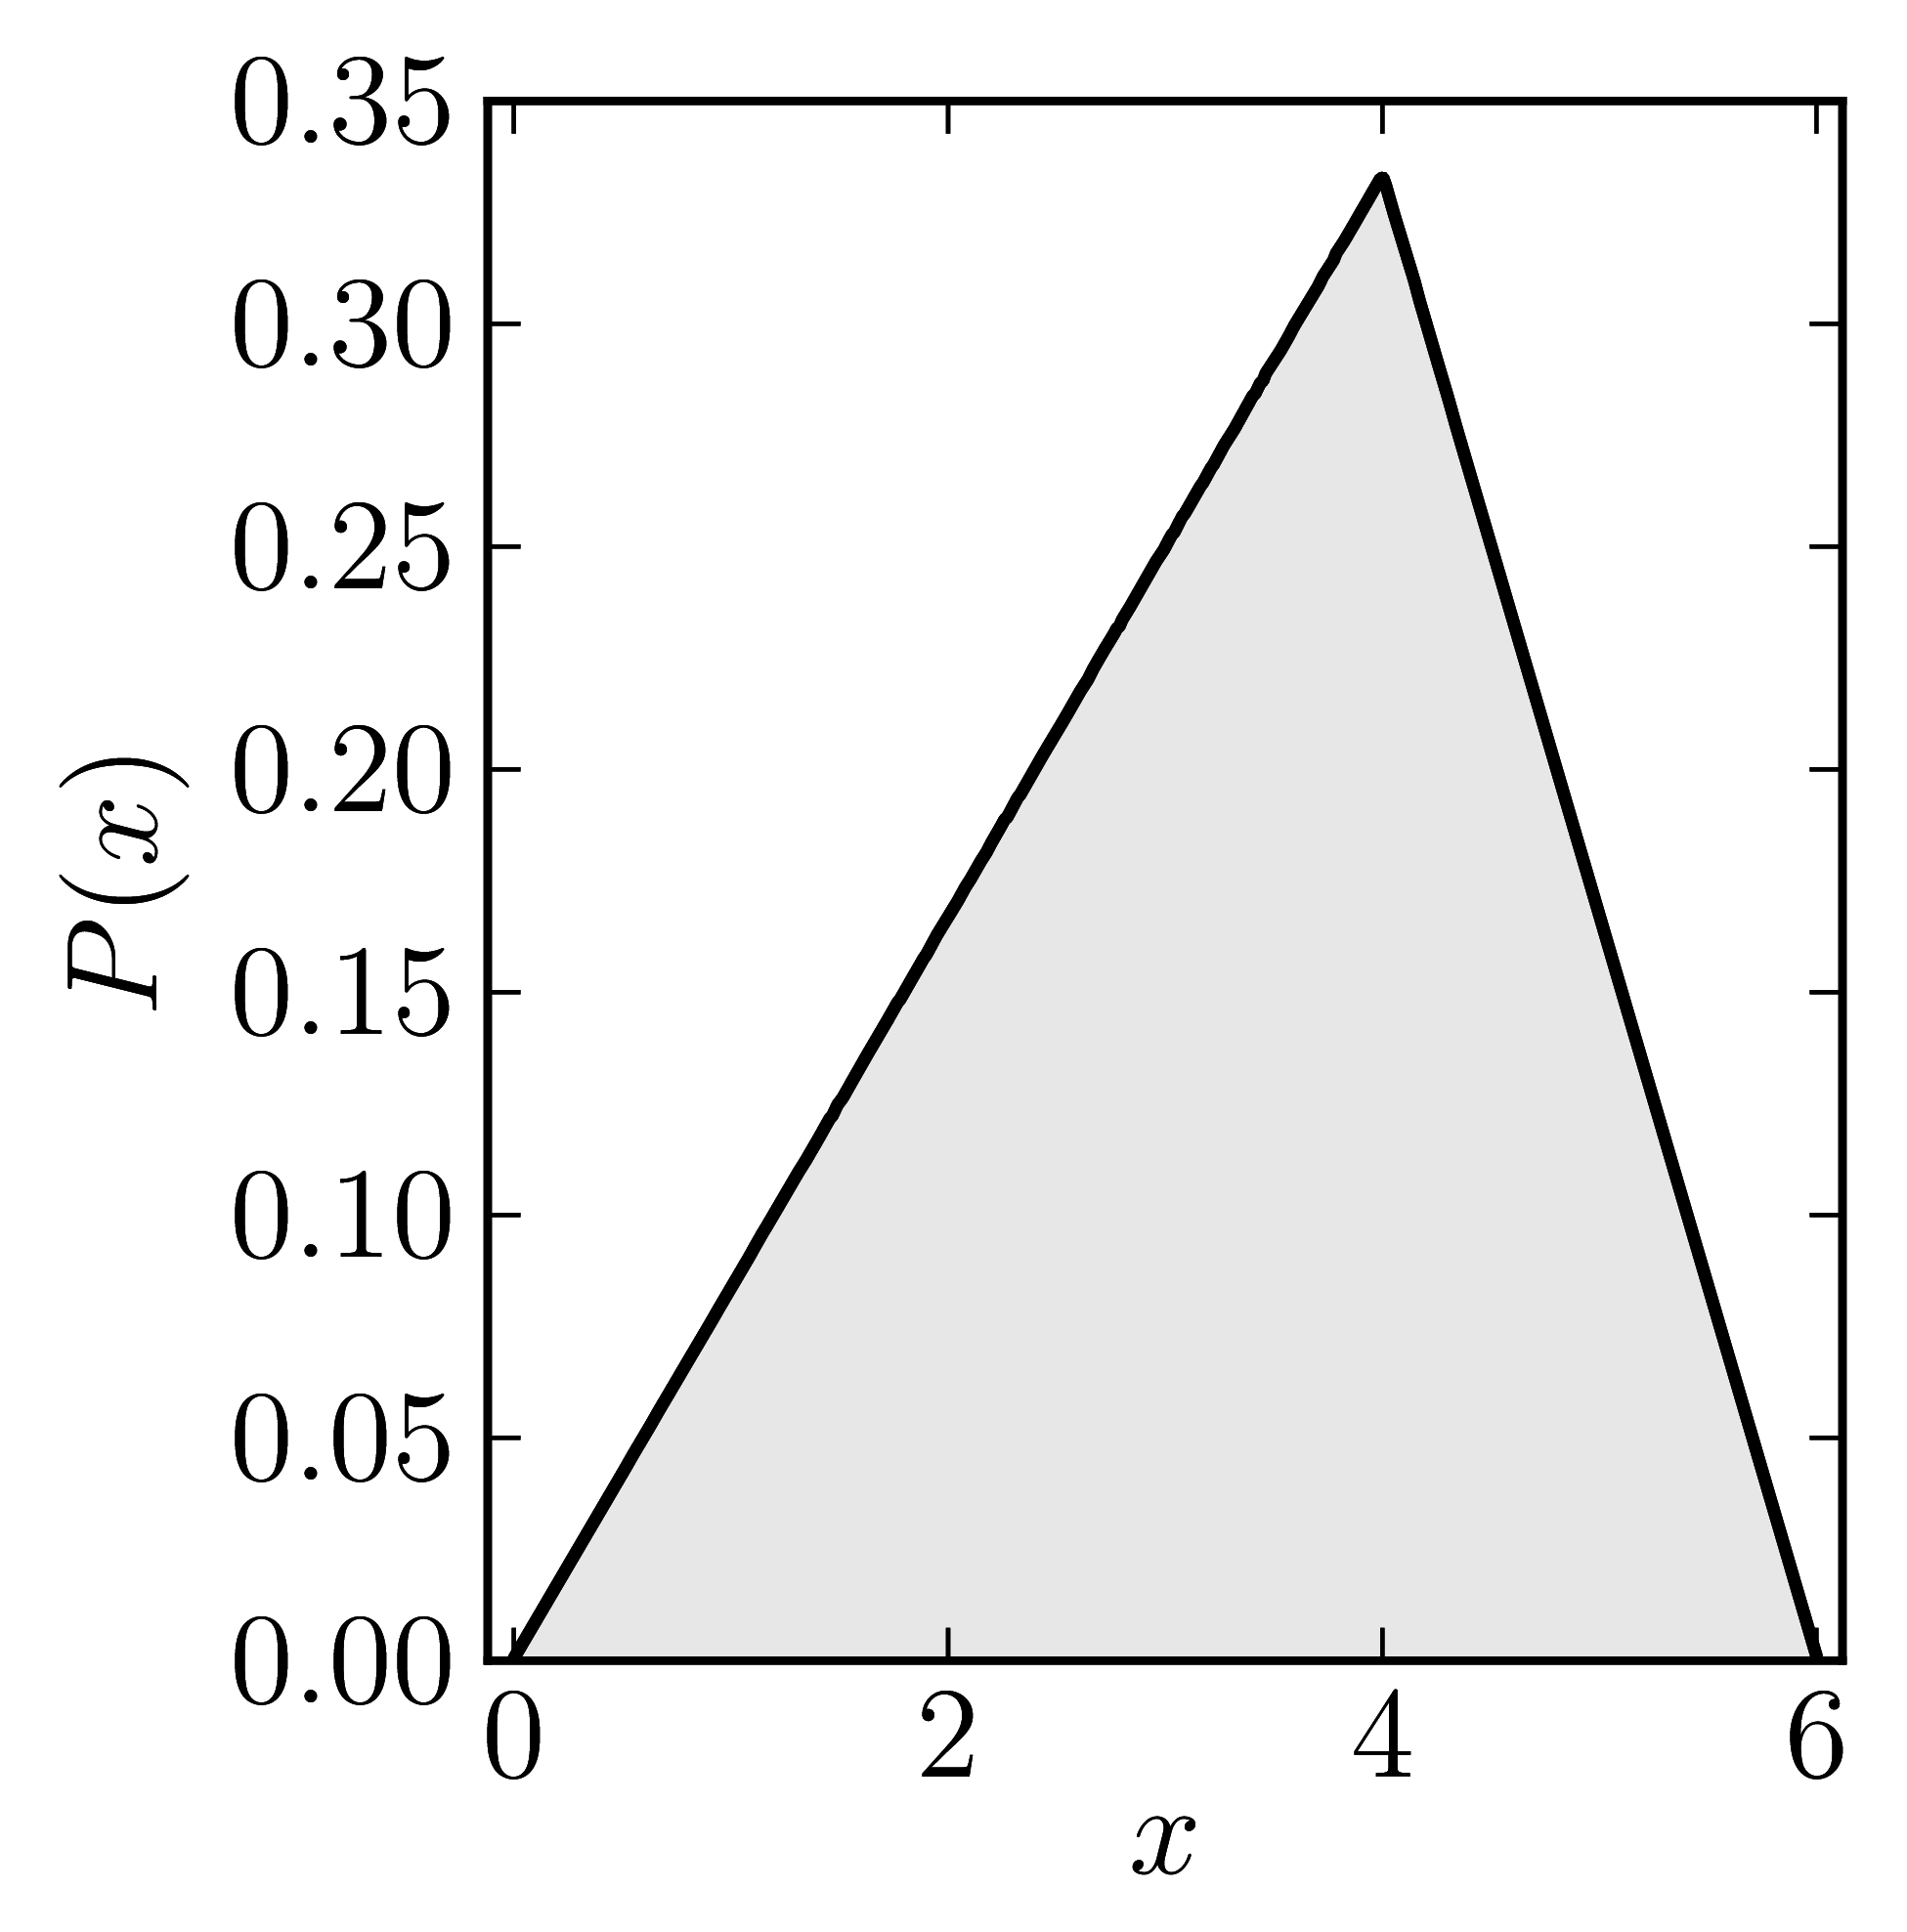 Standard numerical shadow with respect to complex states